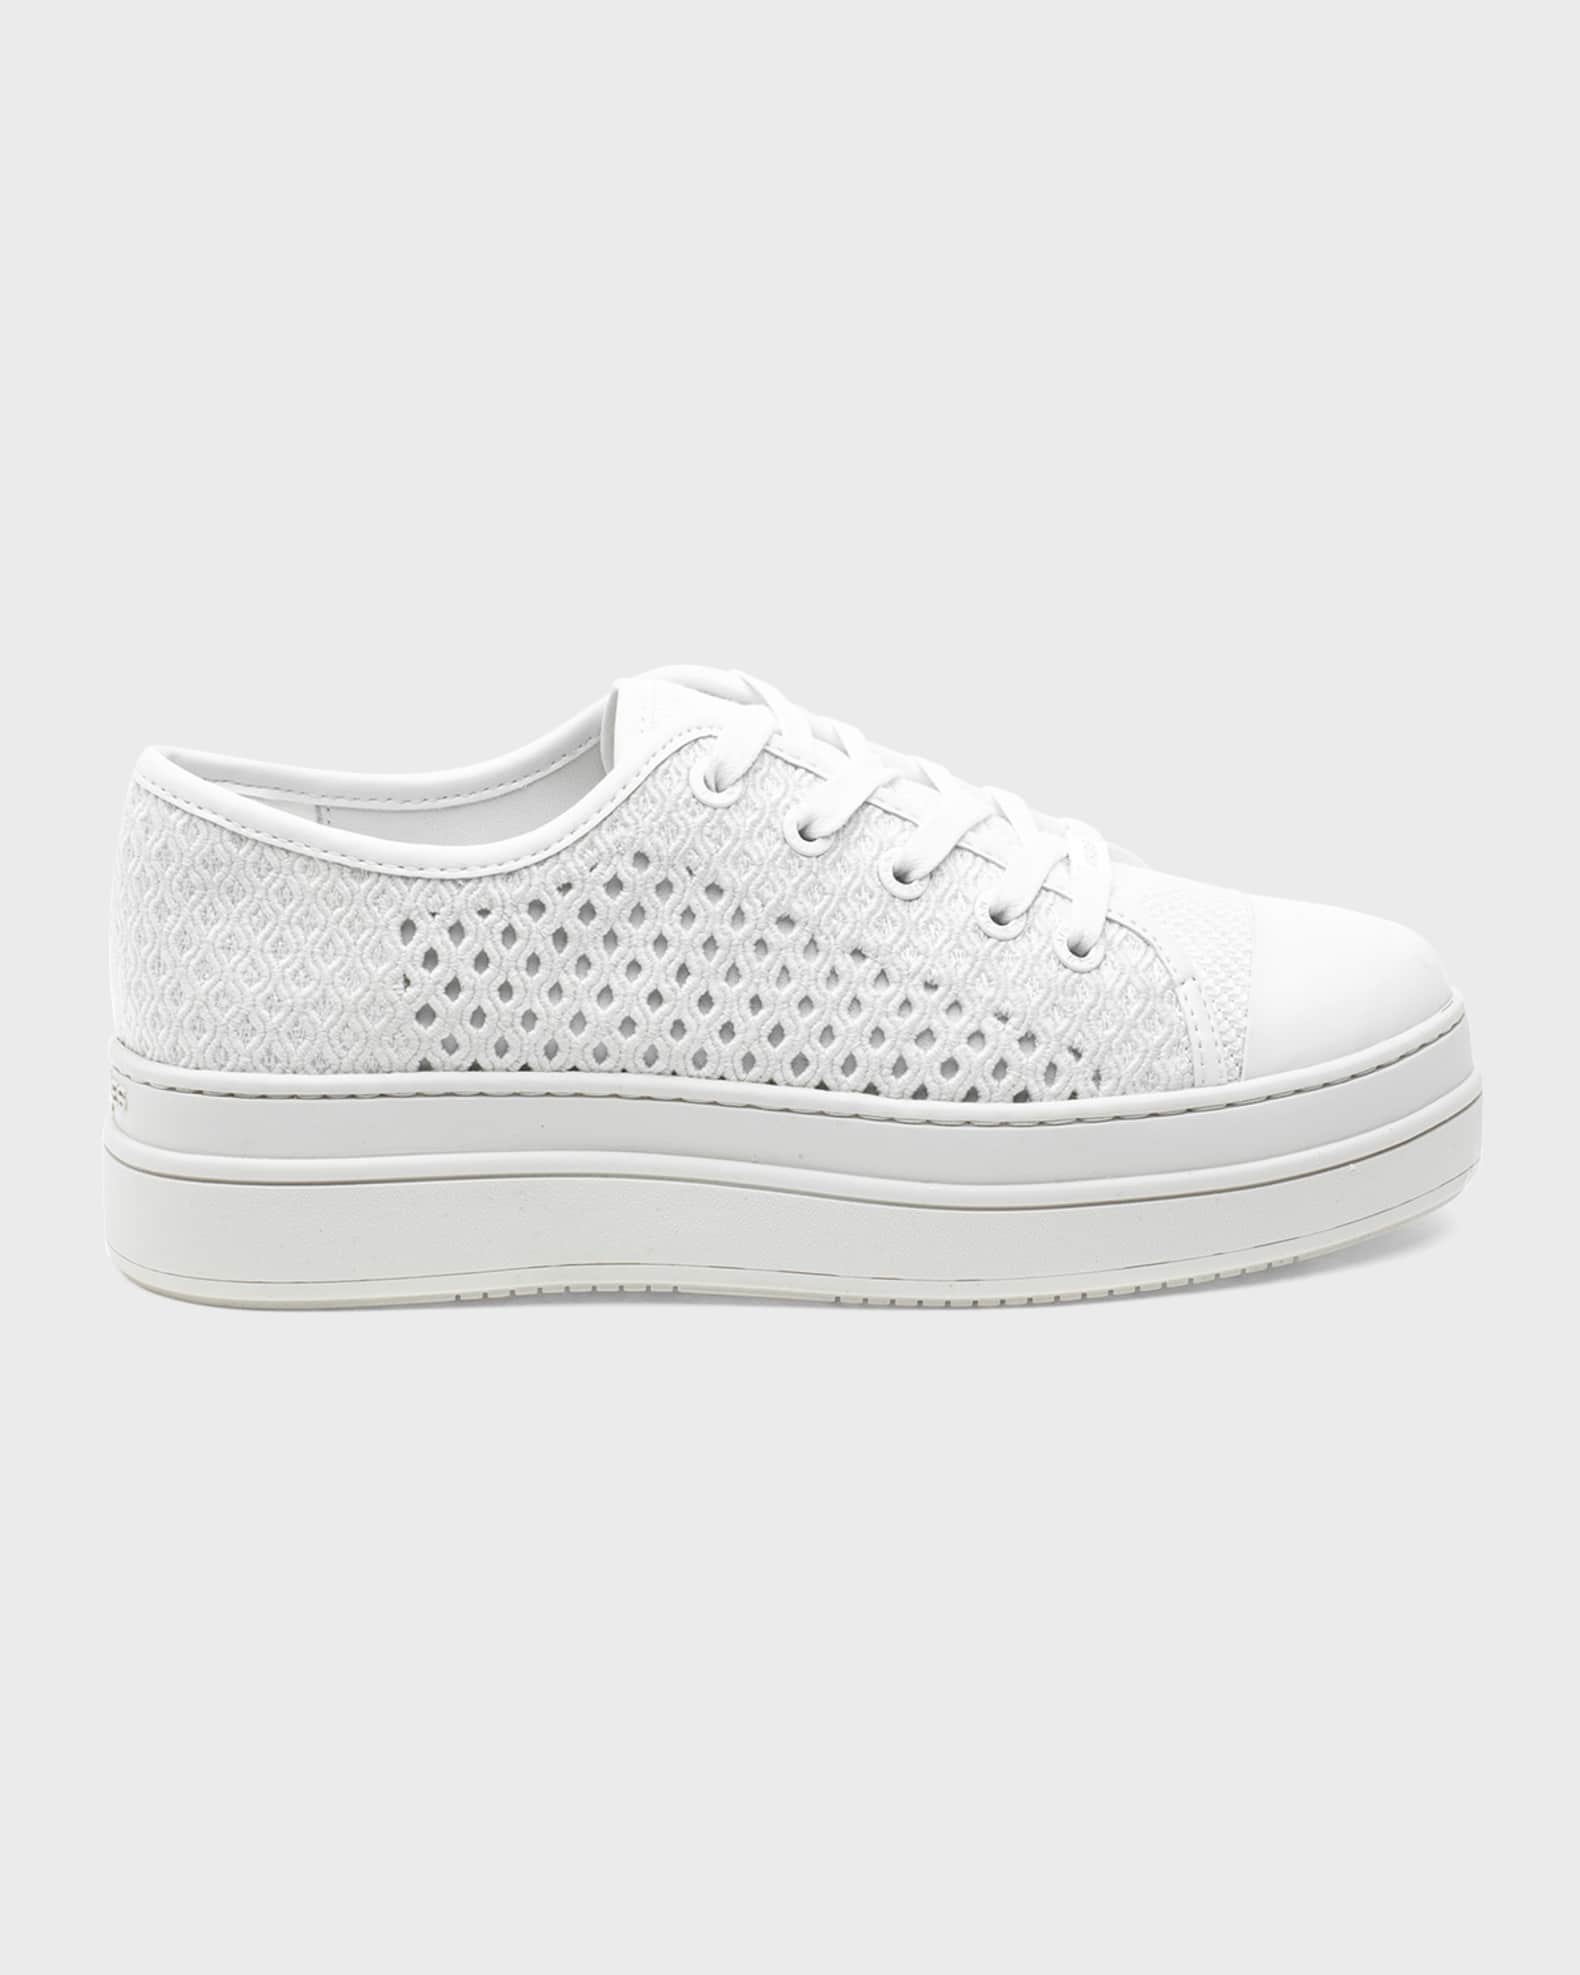 JSlides Natashsa Perforated Low-Top Sneakers | Neiman Marcus